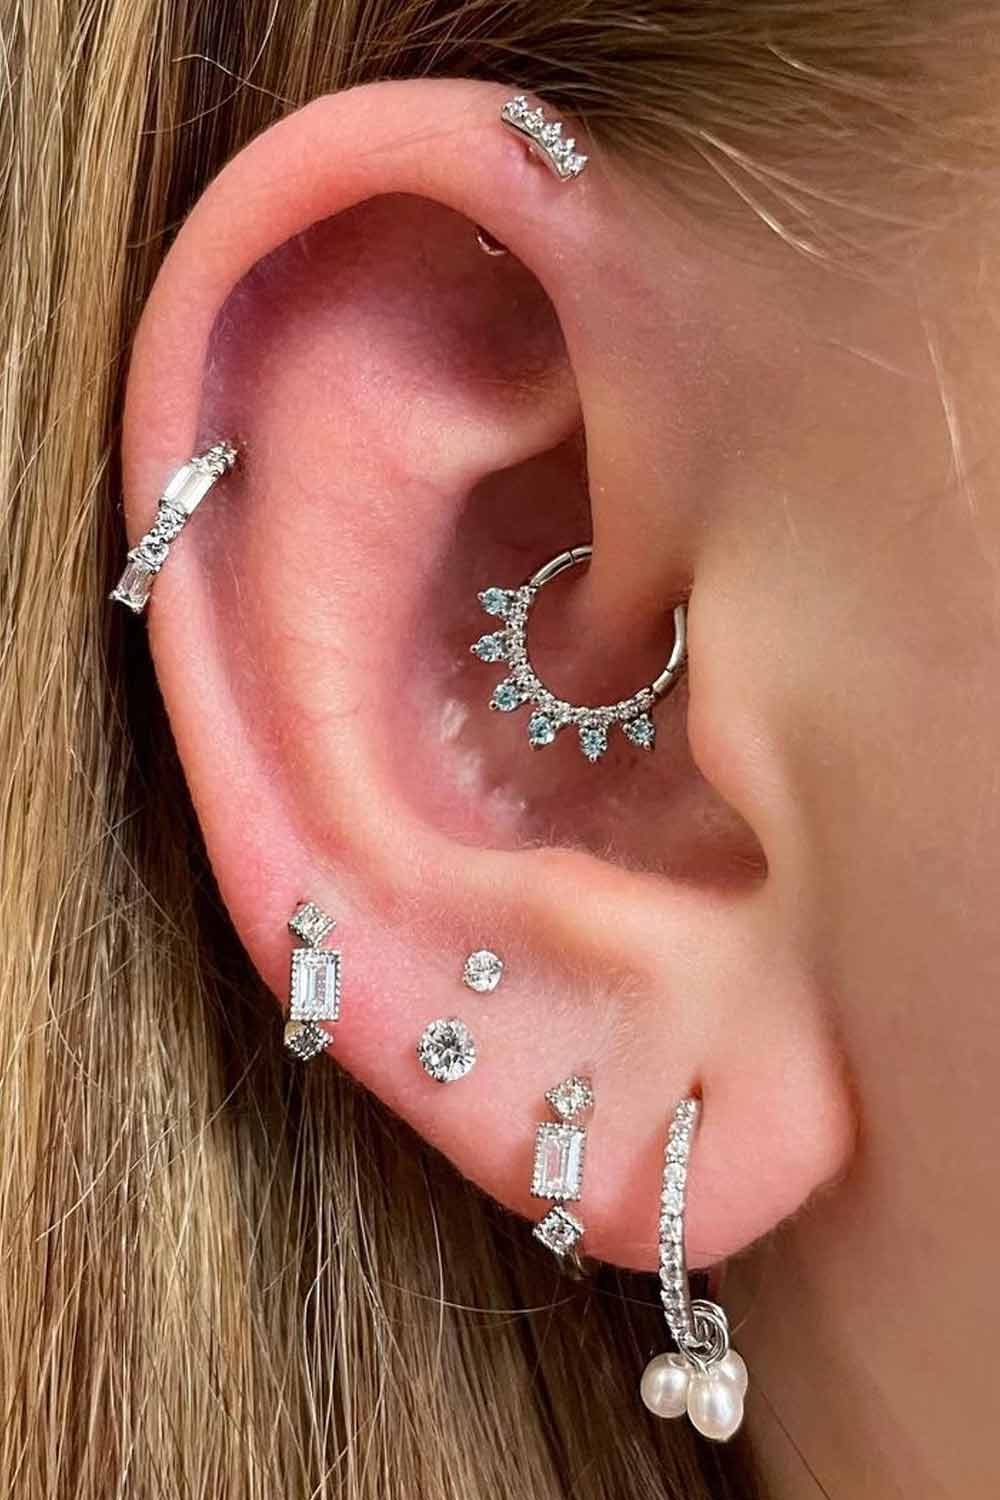 Jewelry Types for Daith Piercing